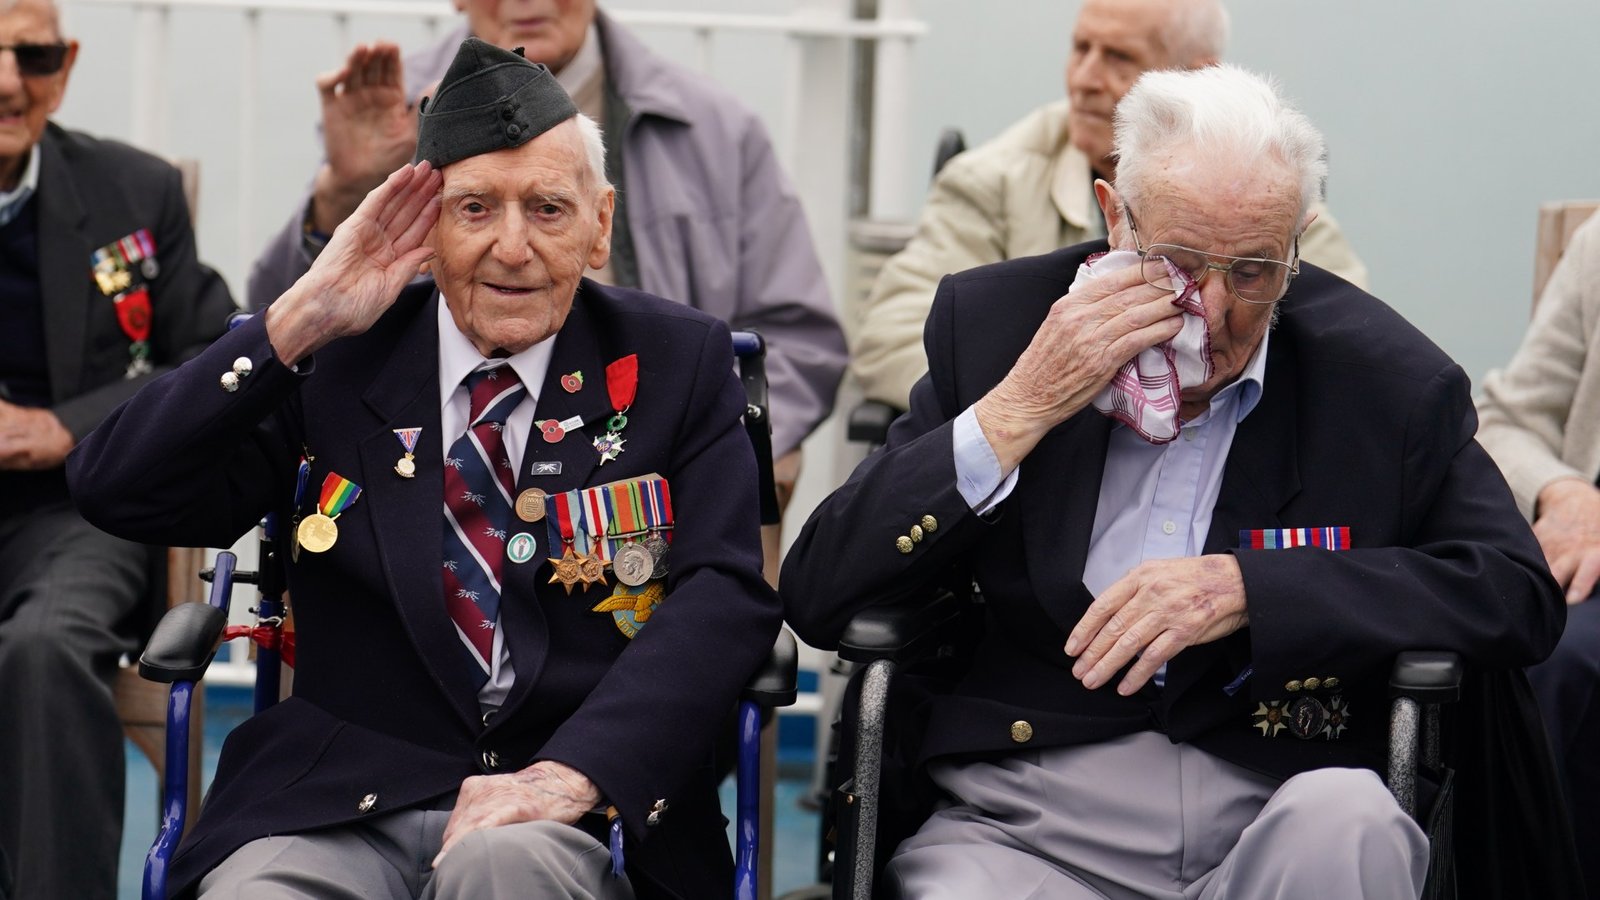 D Day veterans brim with pride and emotion as they head back to the scene of their finest hour